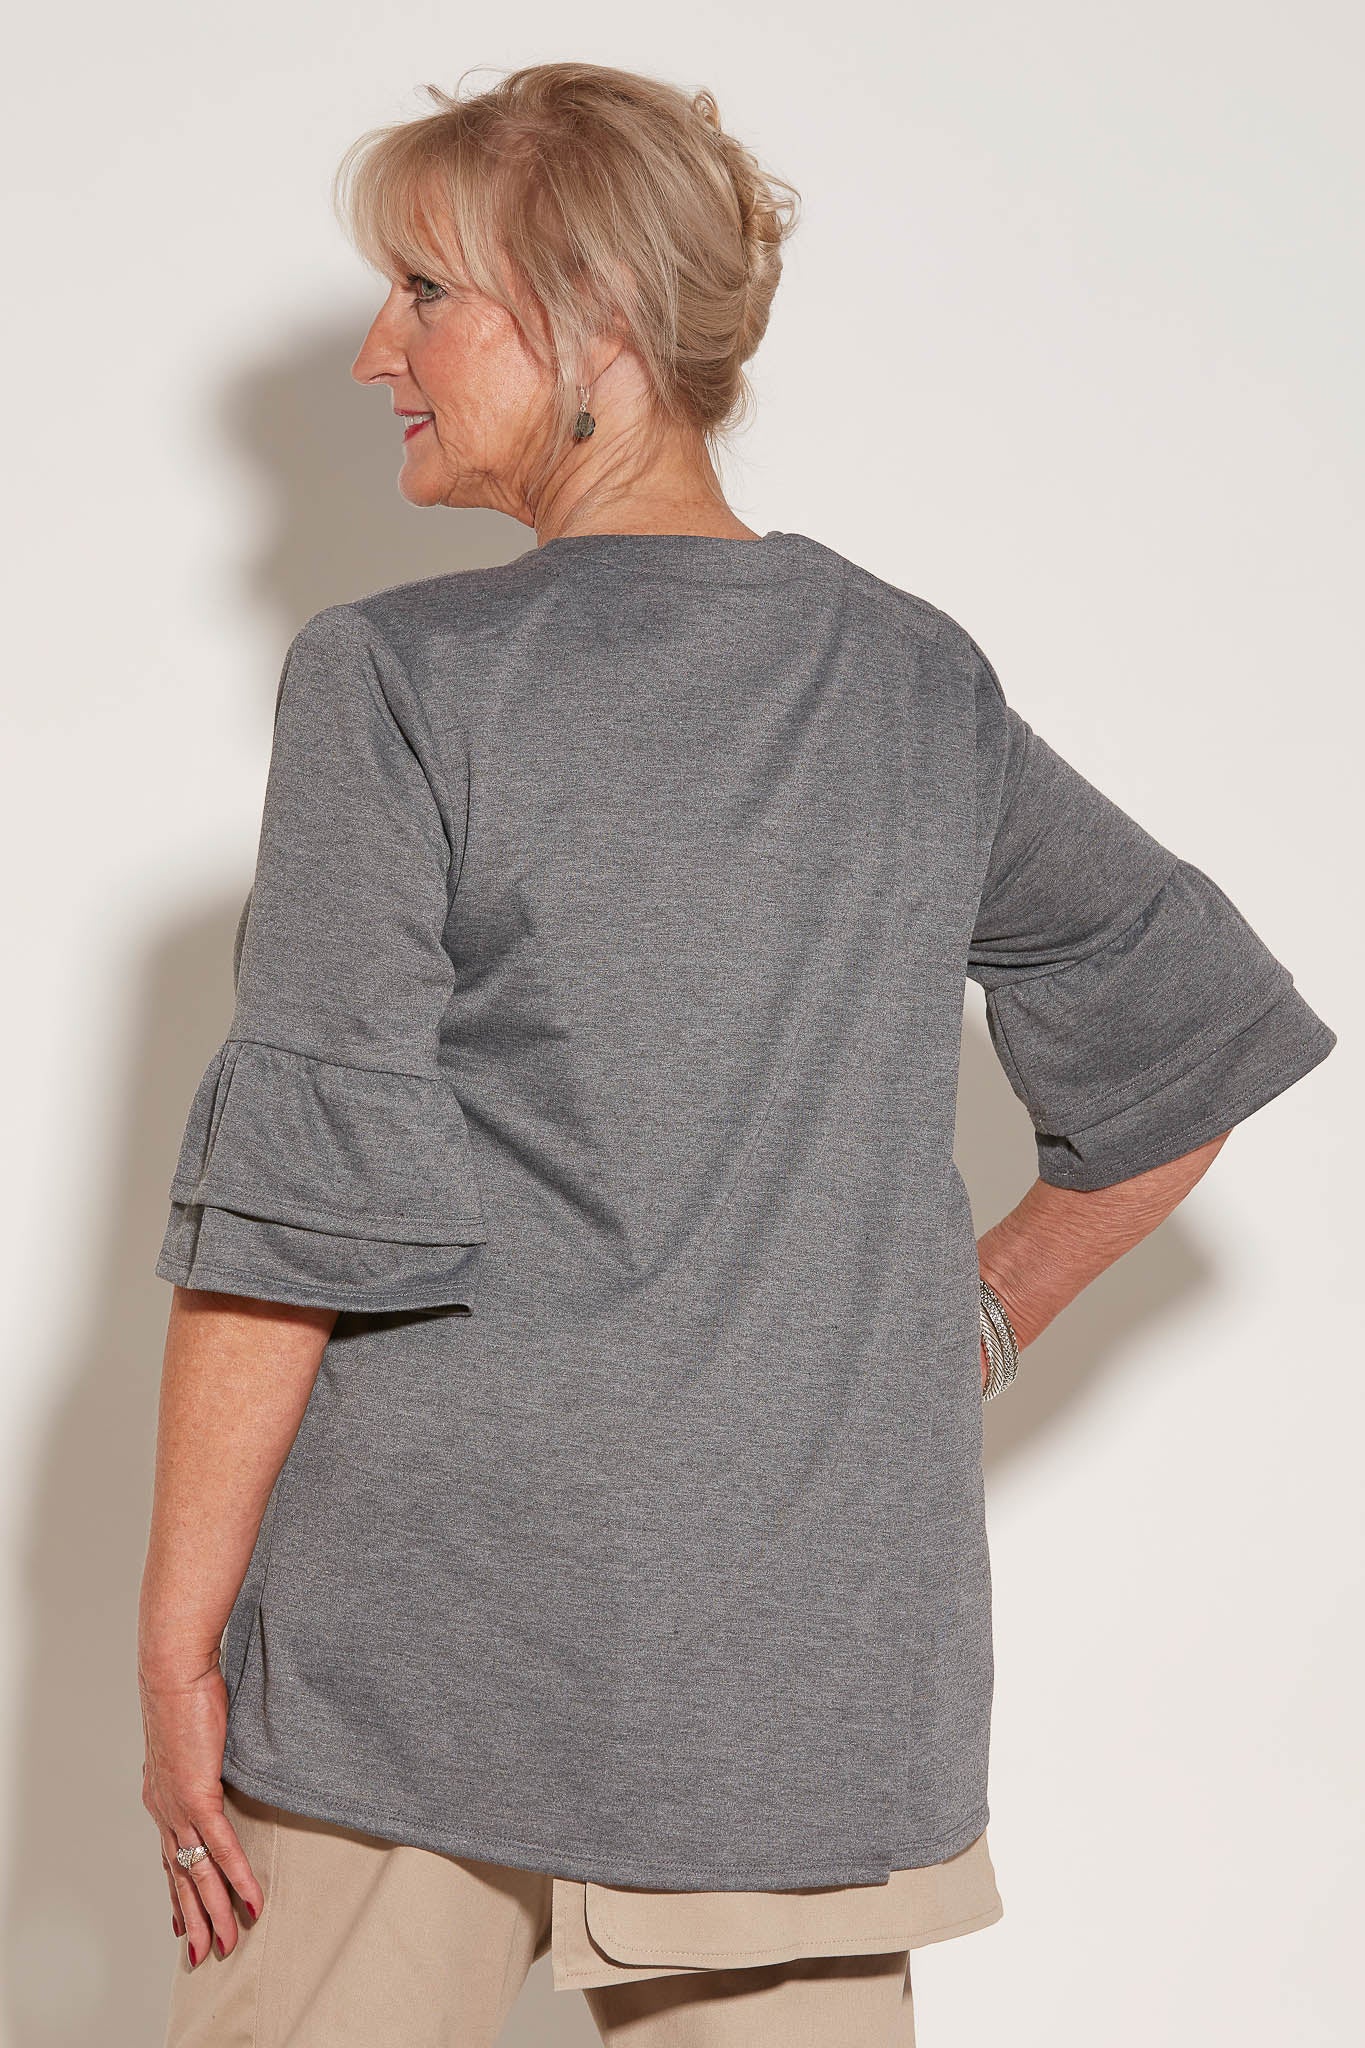 Knit Top for Women - Grey | Cristy | Adaptive Clothing by Ovidis